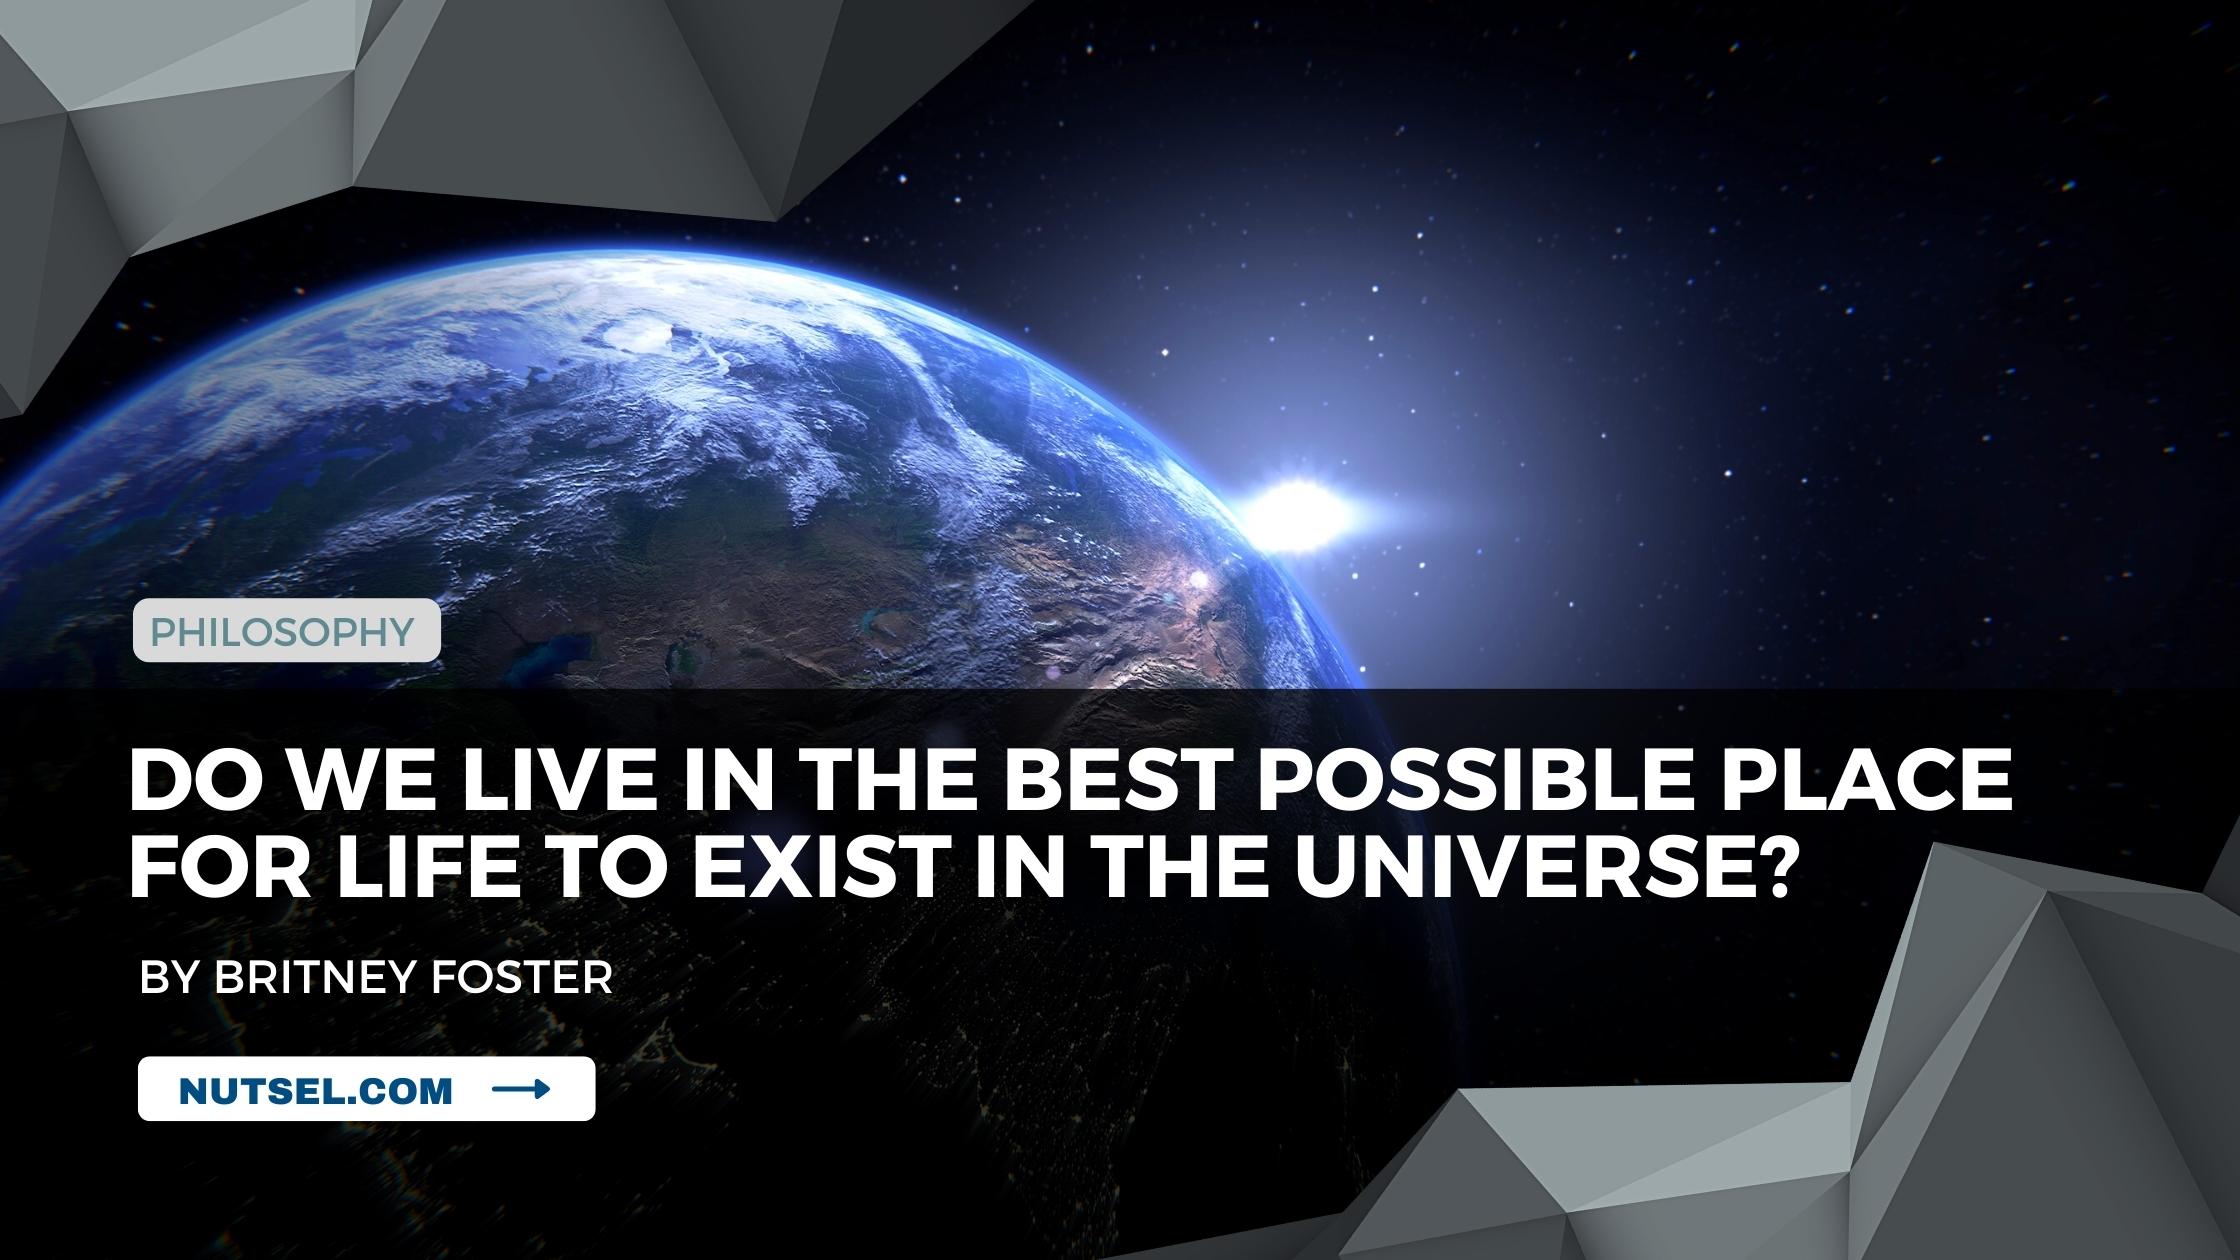 Do we live in the best possible place for life to exist in the universe?